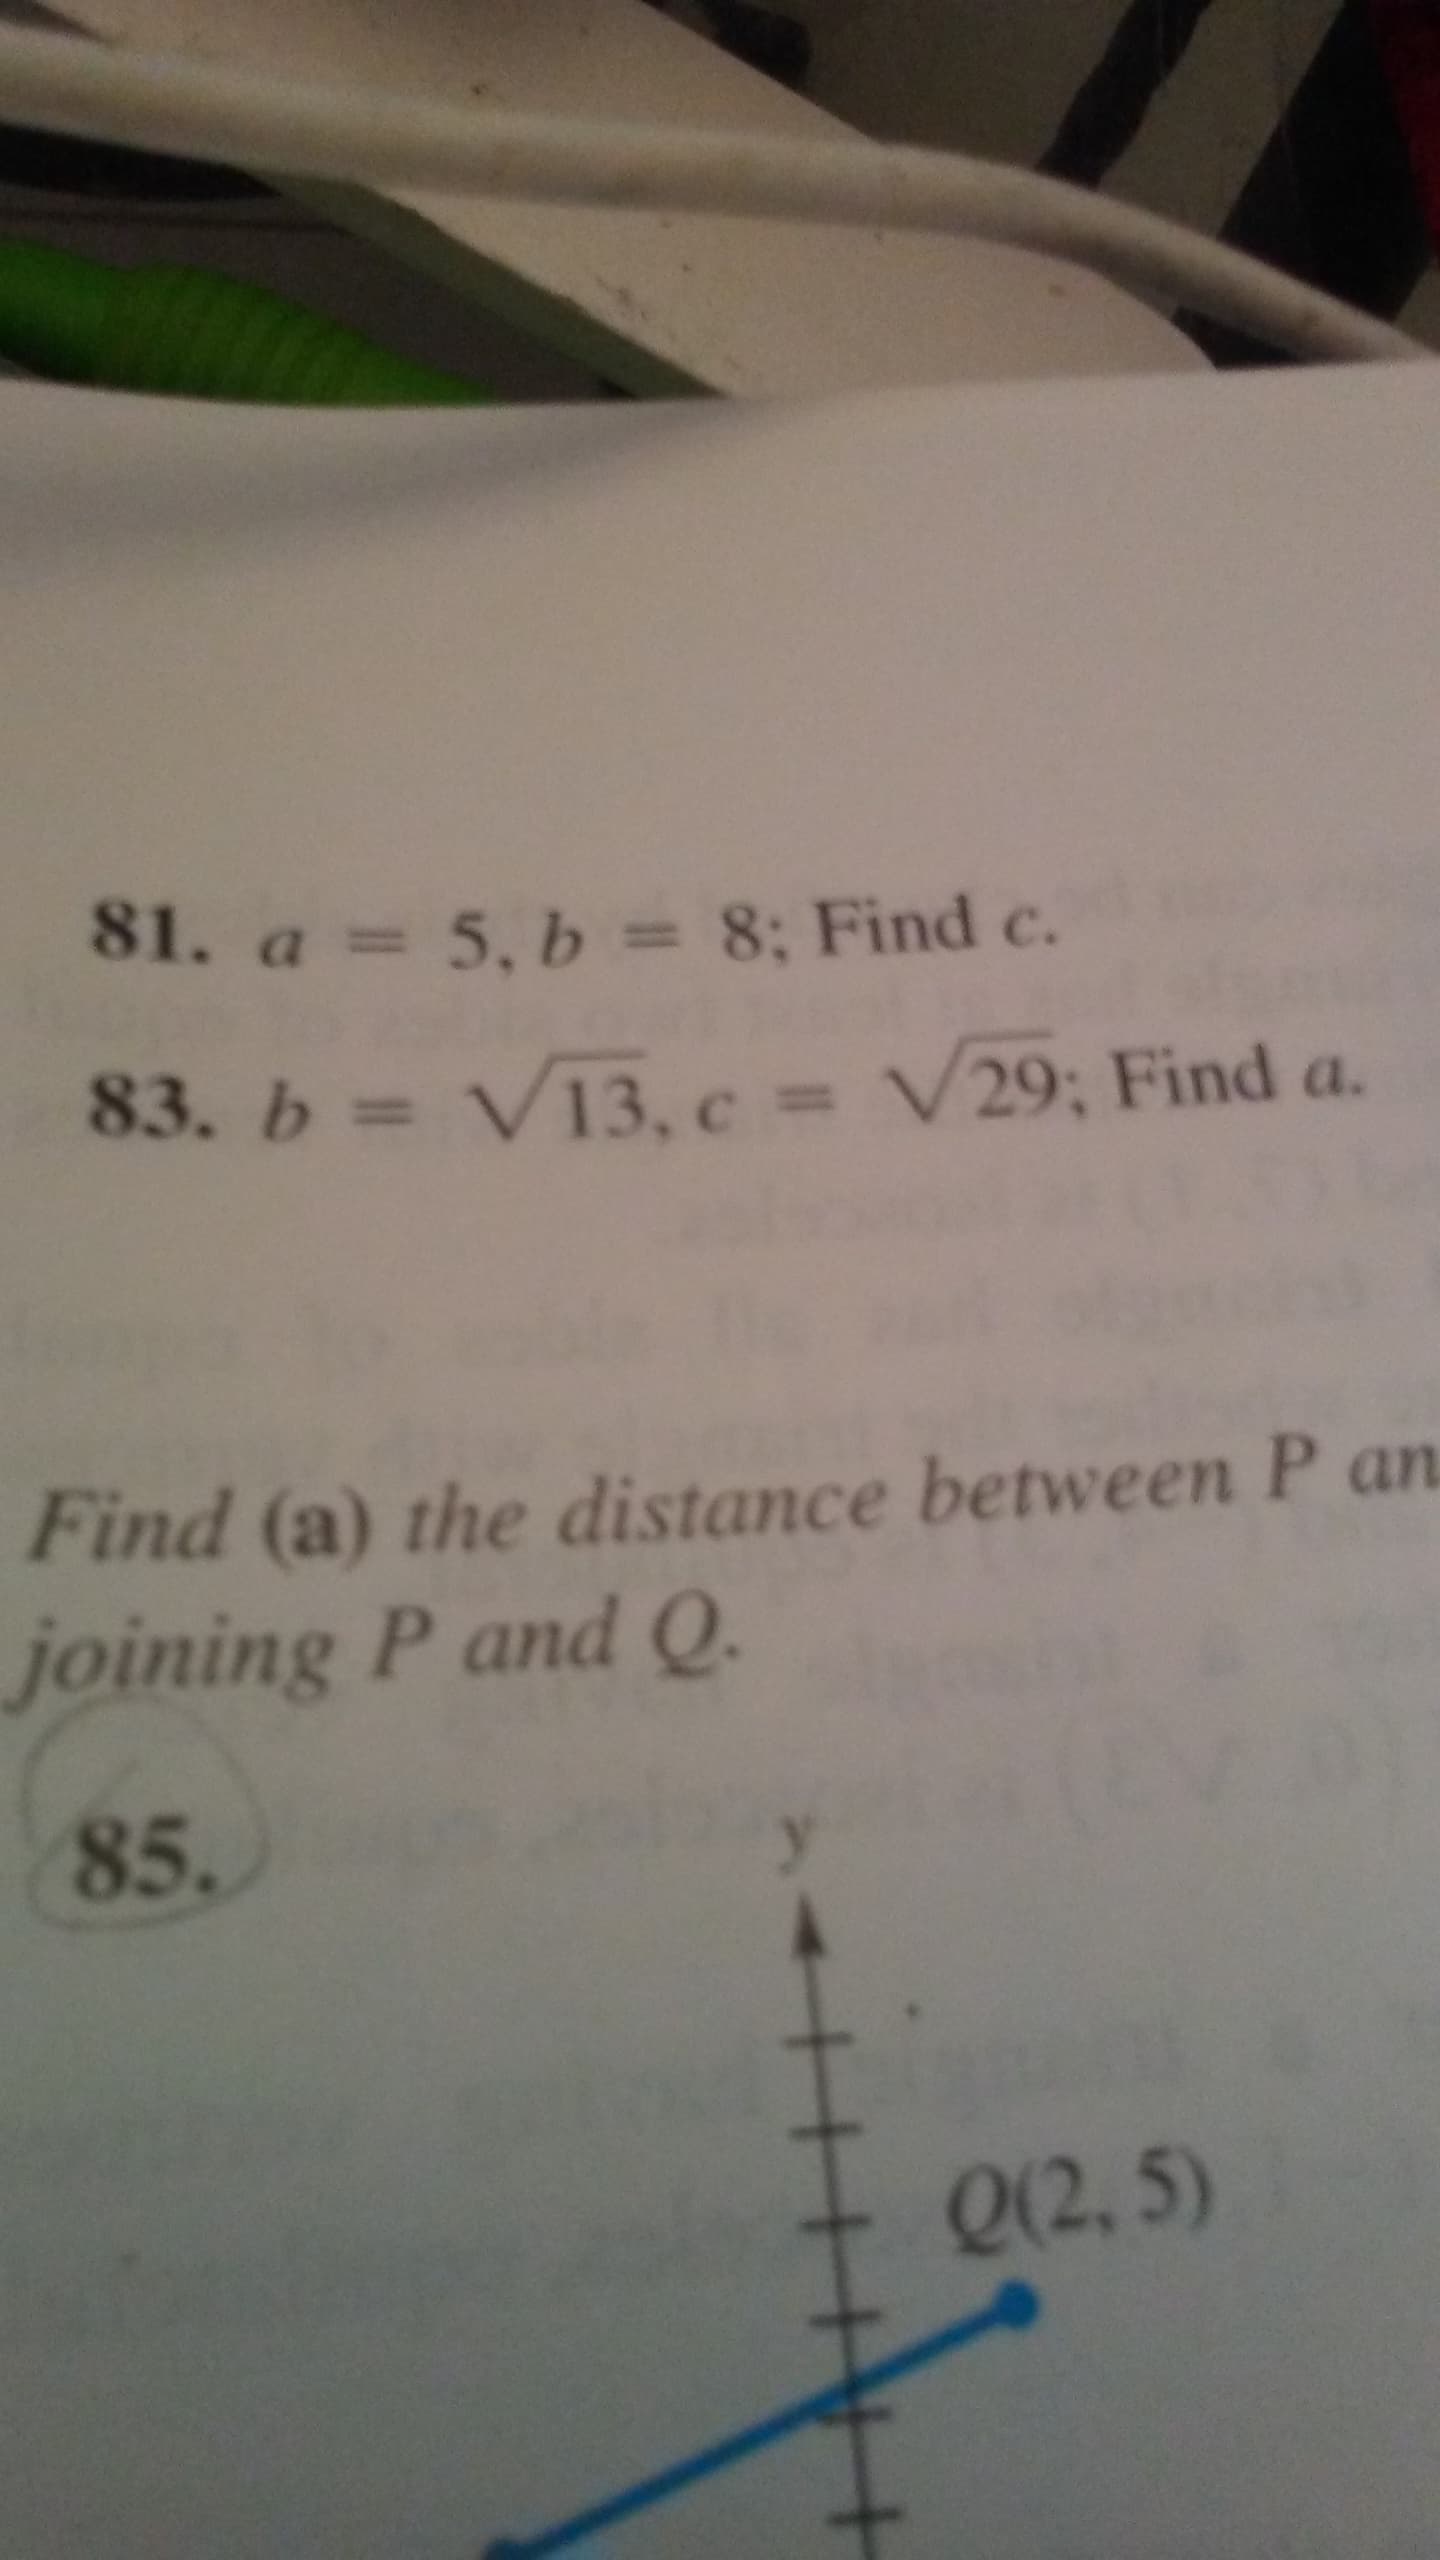 81. a = 5, b = 8; Find c.
83. b= VI3, c = V29; Find a.
Find (a) the distance between P an
joining P and Q.
85.
Q(2,5)
